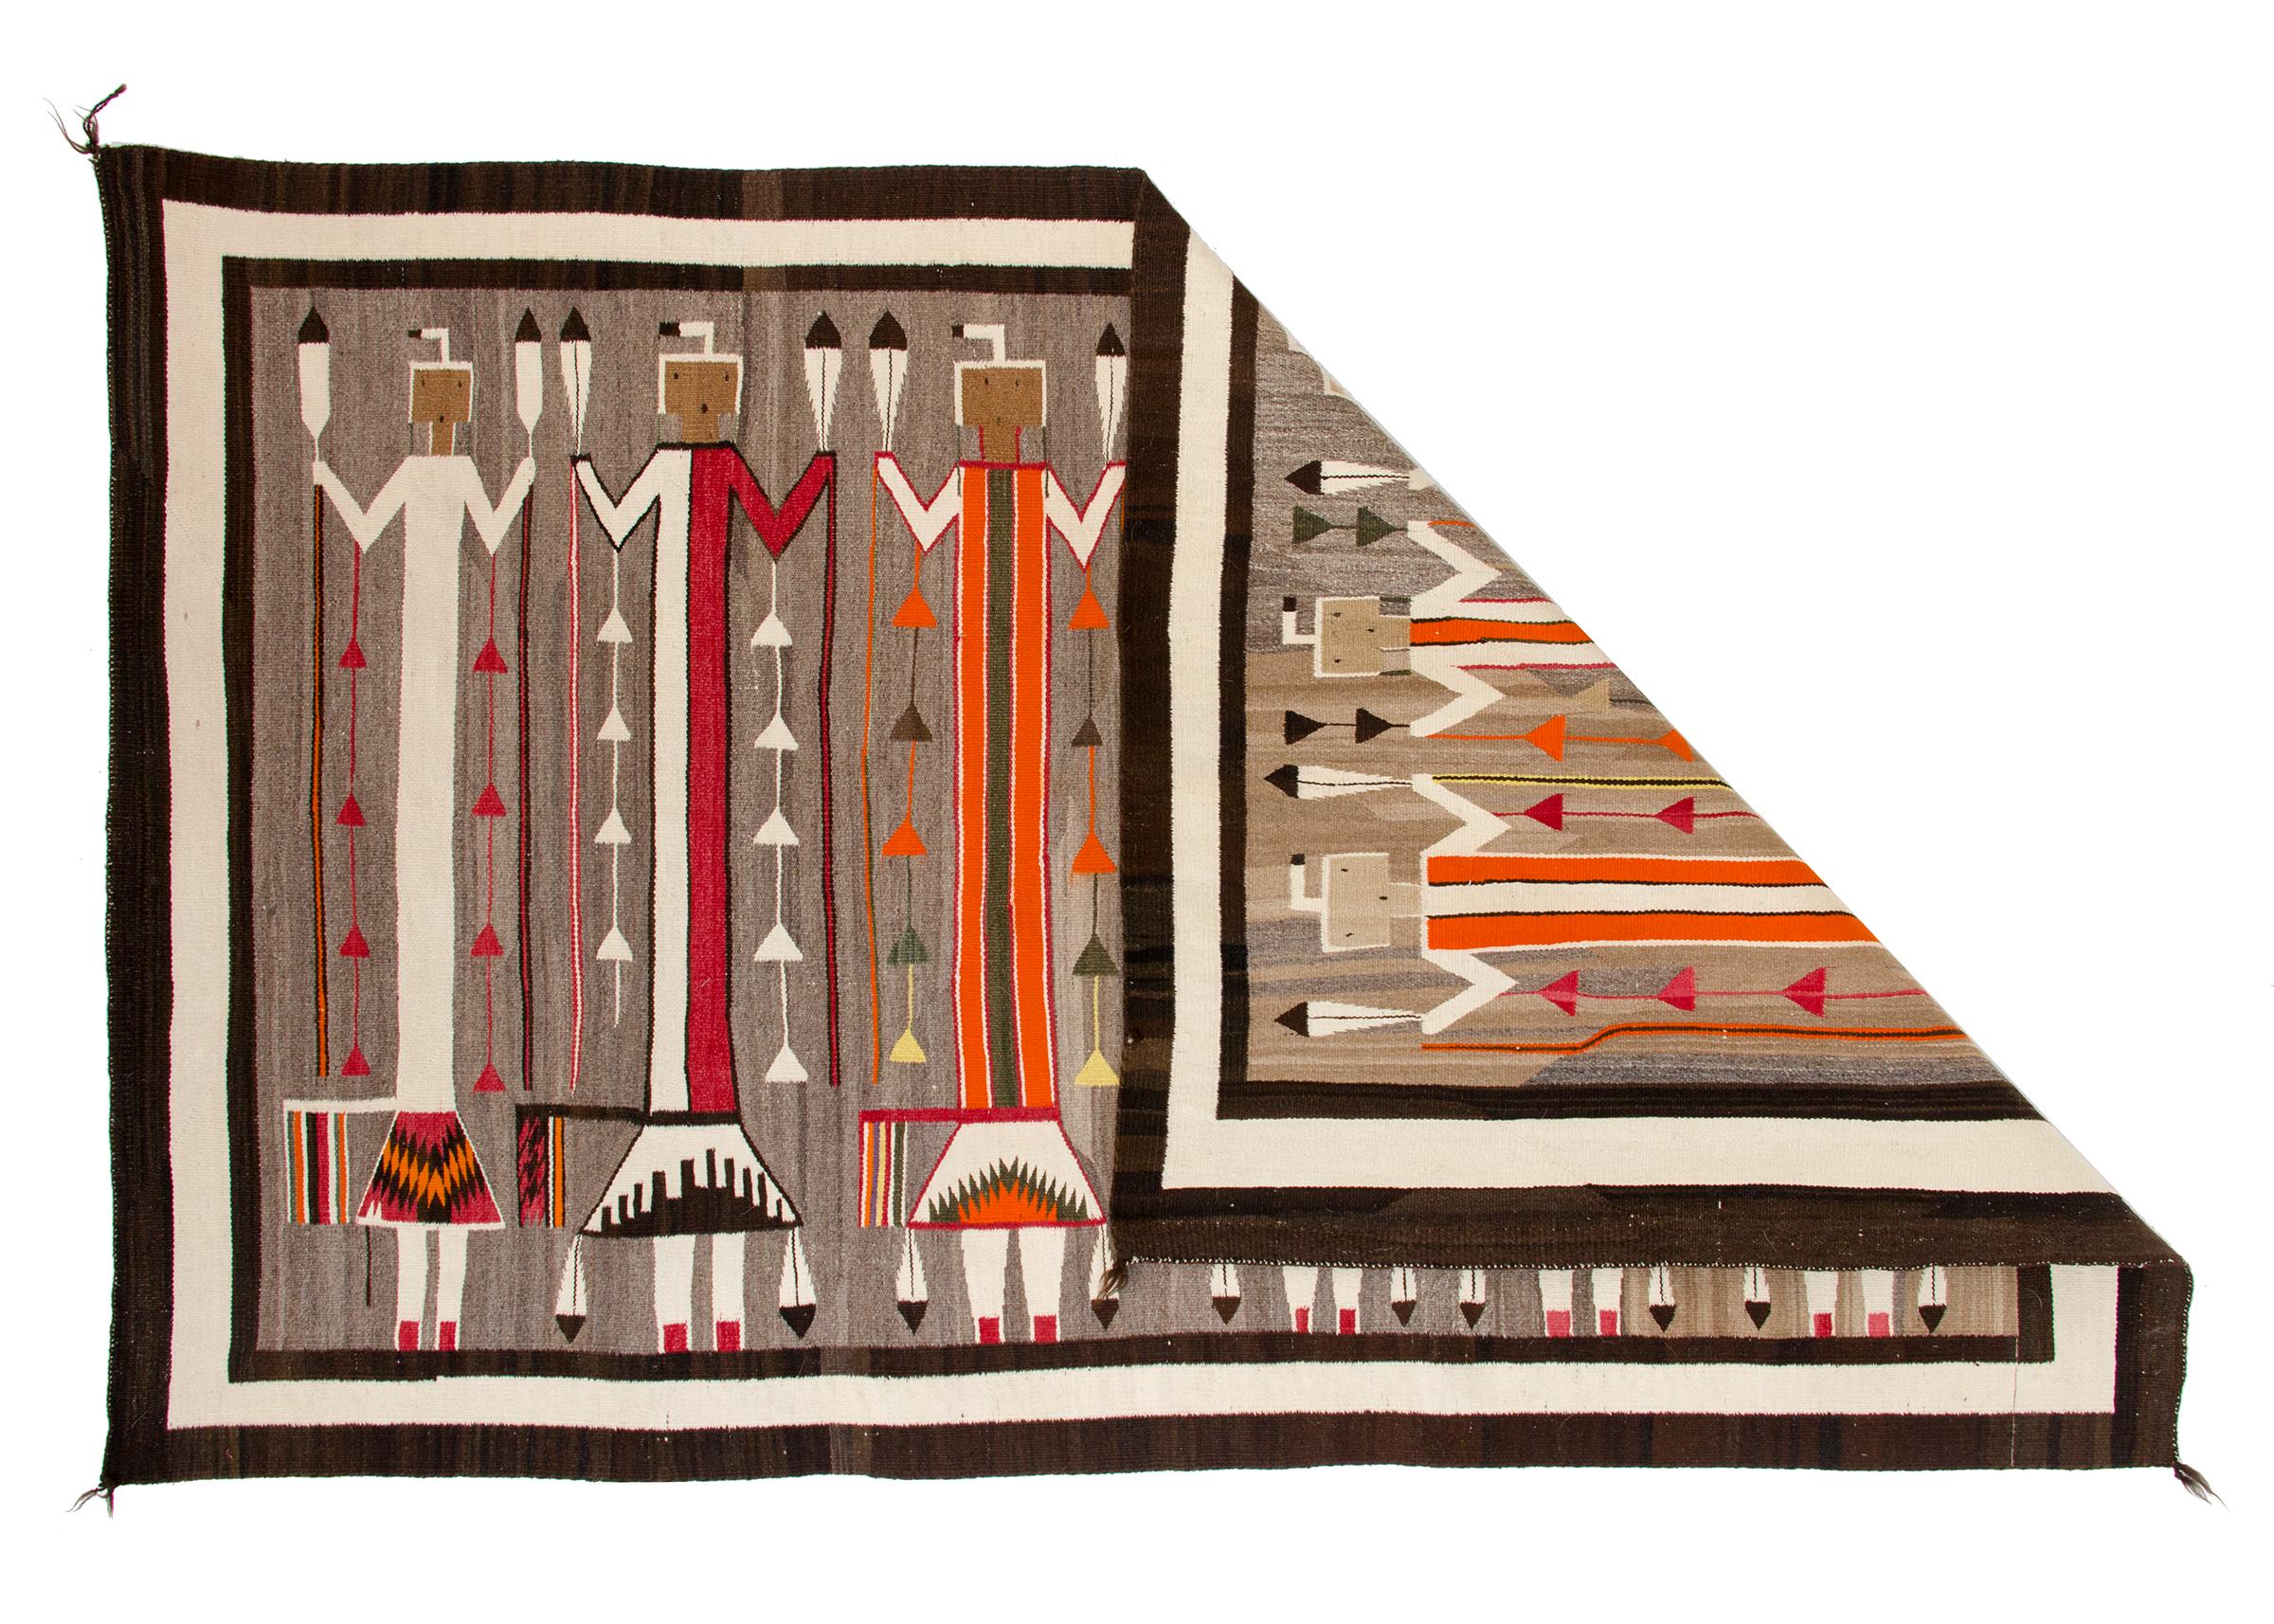 Vintage Navajo rug, circa 1920s-1930s, Pictorial Weaving with six Yei (Yeibichai) figures holding feathers. Woven of native hand-spun wool in natural fleece yarns in gray, ivory/white and brown with aniline-dyed yellow, red, orange/tan, (known as